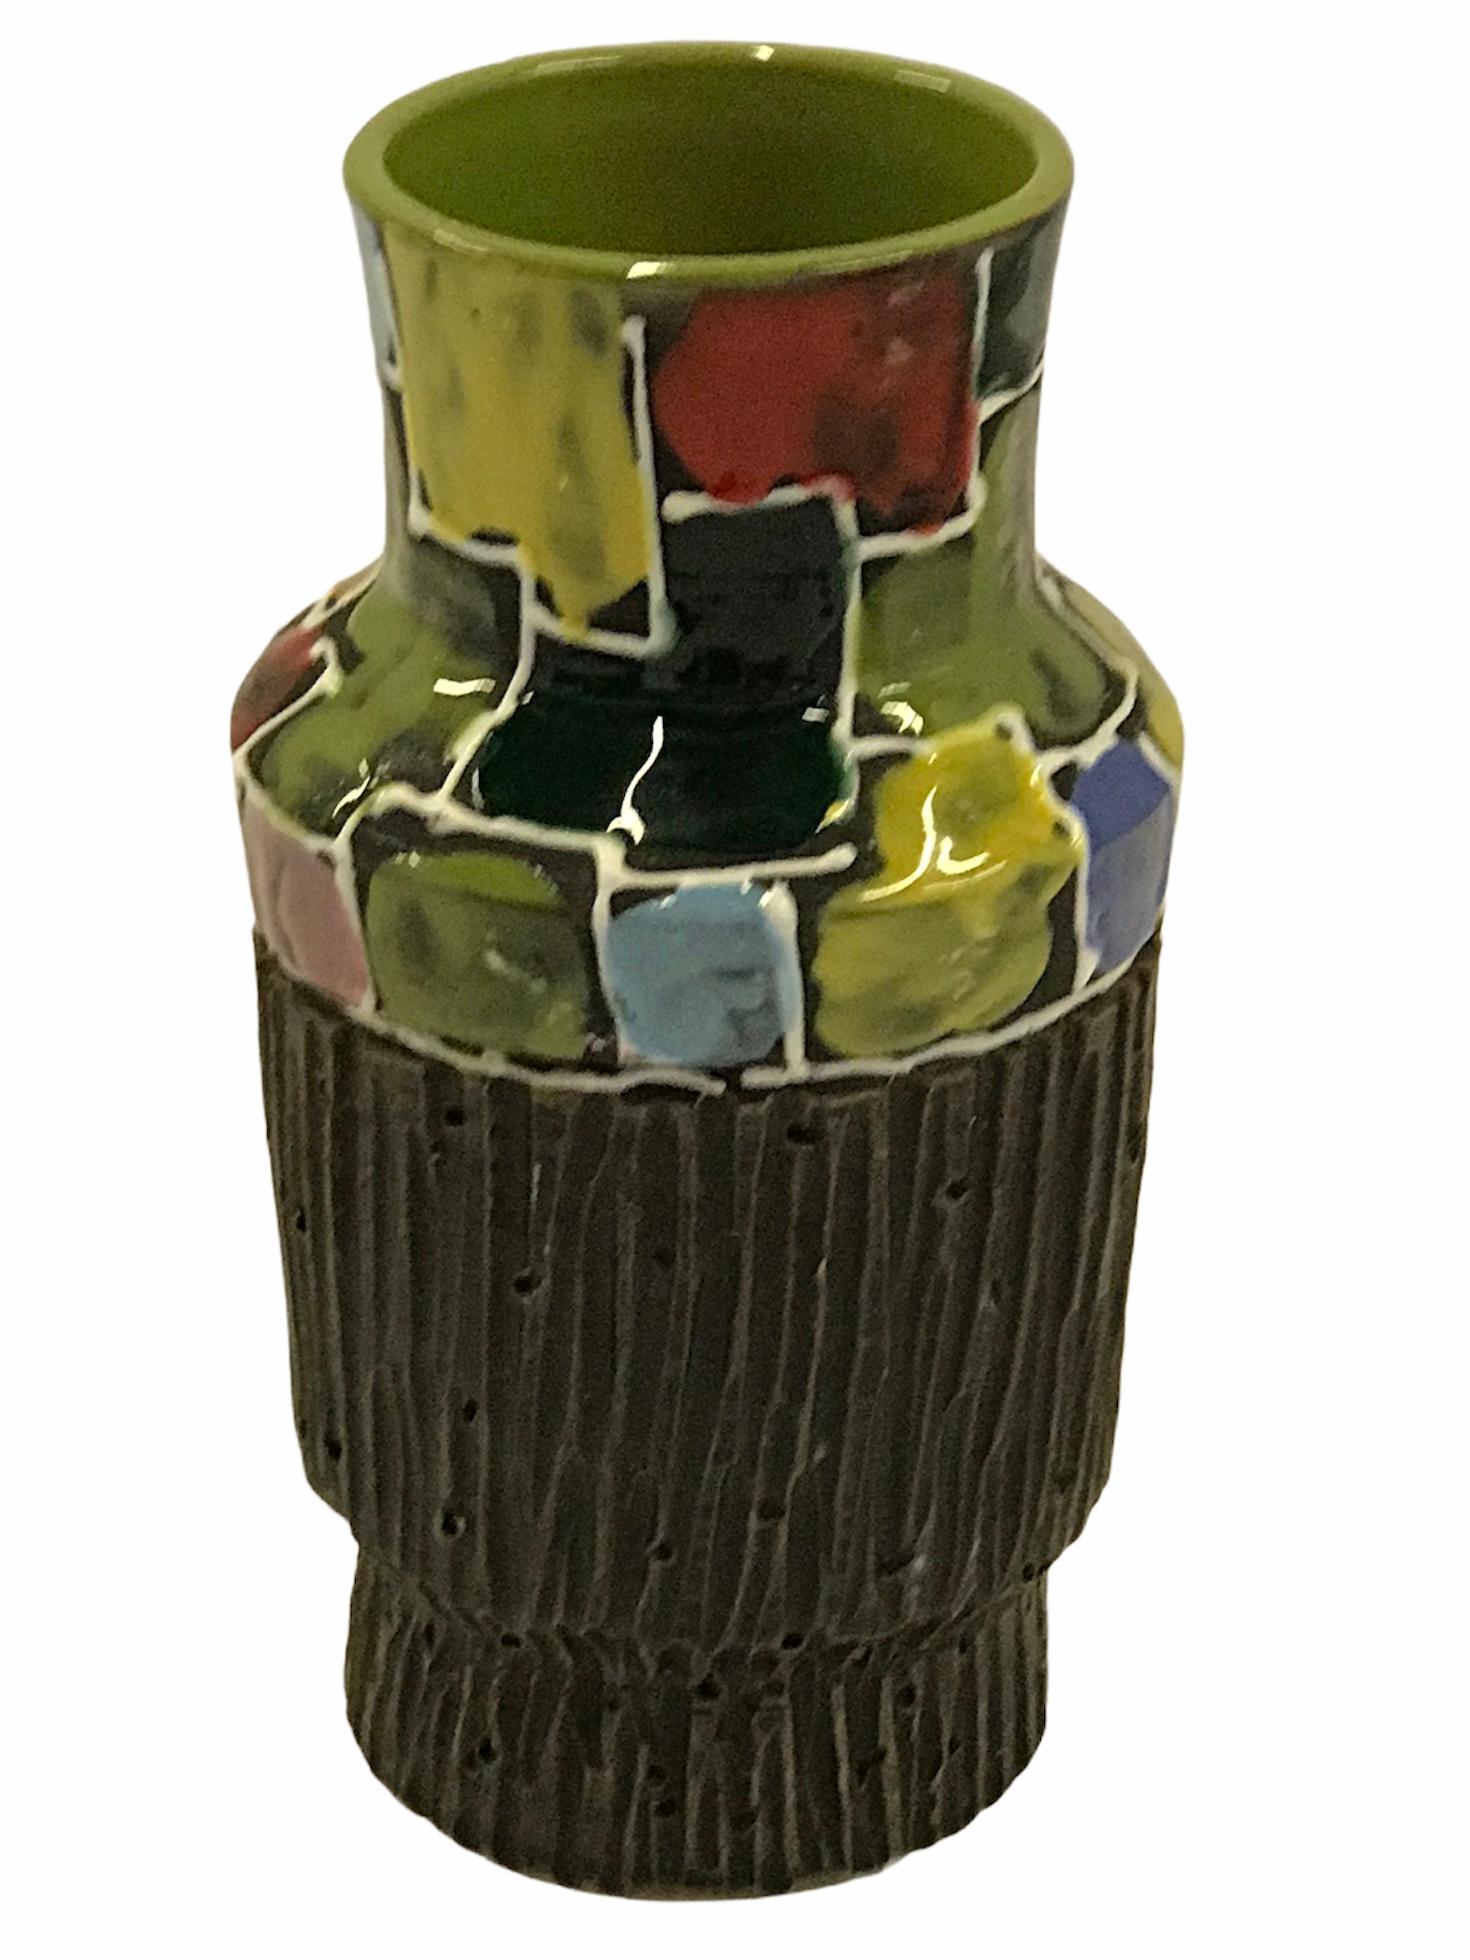 REDUCED FROM $250.....Organic Mid-Century Modern textured Italian Pottery cylindrical vase attributed to Alvino Bagni in a Mosaic design. Made by Fratelli Fanciullacci in the early 1960s. With glossy glazed squares in yellow, pink, orange, red,